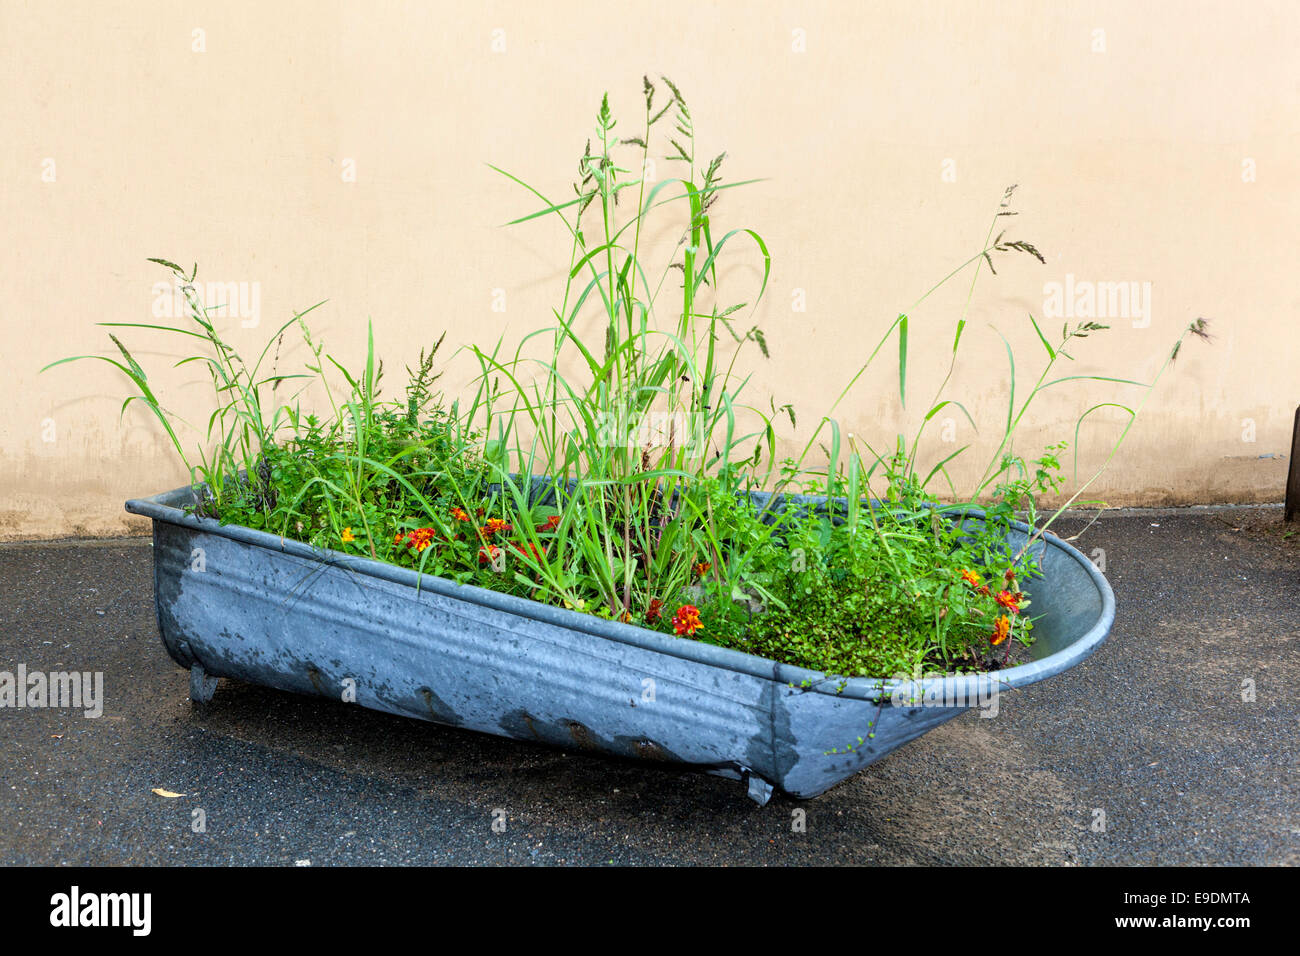 iron bathtub as a flower pot and place for plants Stock Photo